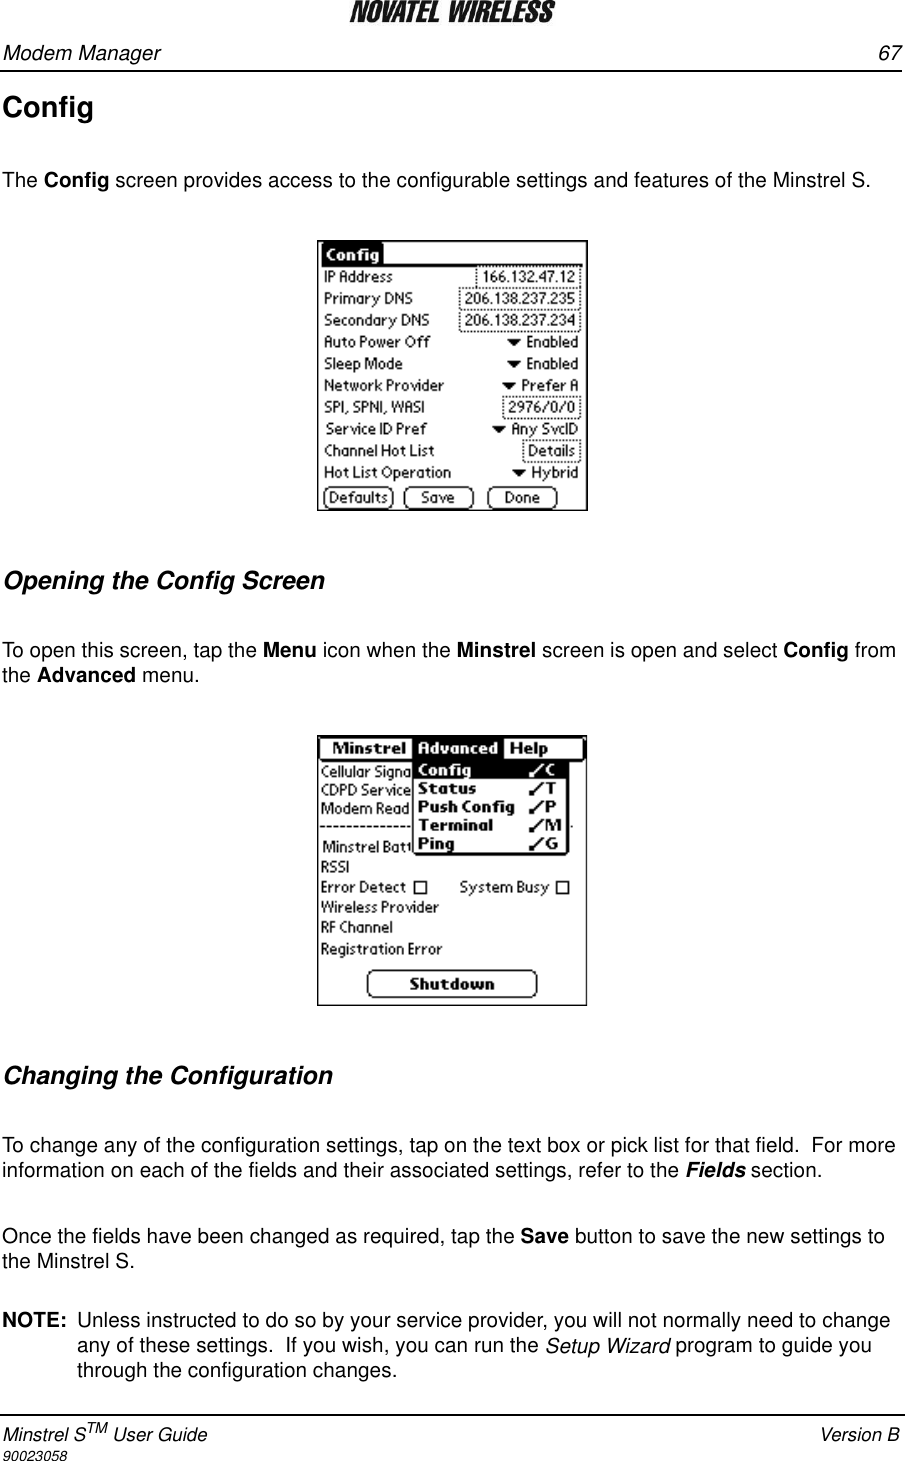 Modem Manager 67Minstrel STM User Guide Version B90023058ConfigThe Config screen provides access to the configurable settings and features of the Minstrel S.  Opening the Config ScreenTo open this screen, tap the Menu icon when the Minstrel screen is open and select Config from the Advanced menu.Changing the ConfigurationTo change any of the configuration settings, tap on the text box or pick list for that field.  For more information on each of the fields and their associated settings, refer to the Fields section.    Once the fields have been changed as required, tap the Save button to save the new settings to the Minstrel S.  NOTE: Unless instructed to do so by your service provider, you will not normally need to change any of these settings.  If you wish, you can run the Setup Wizard program to guide you through the configuration changes.